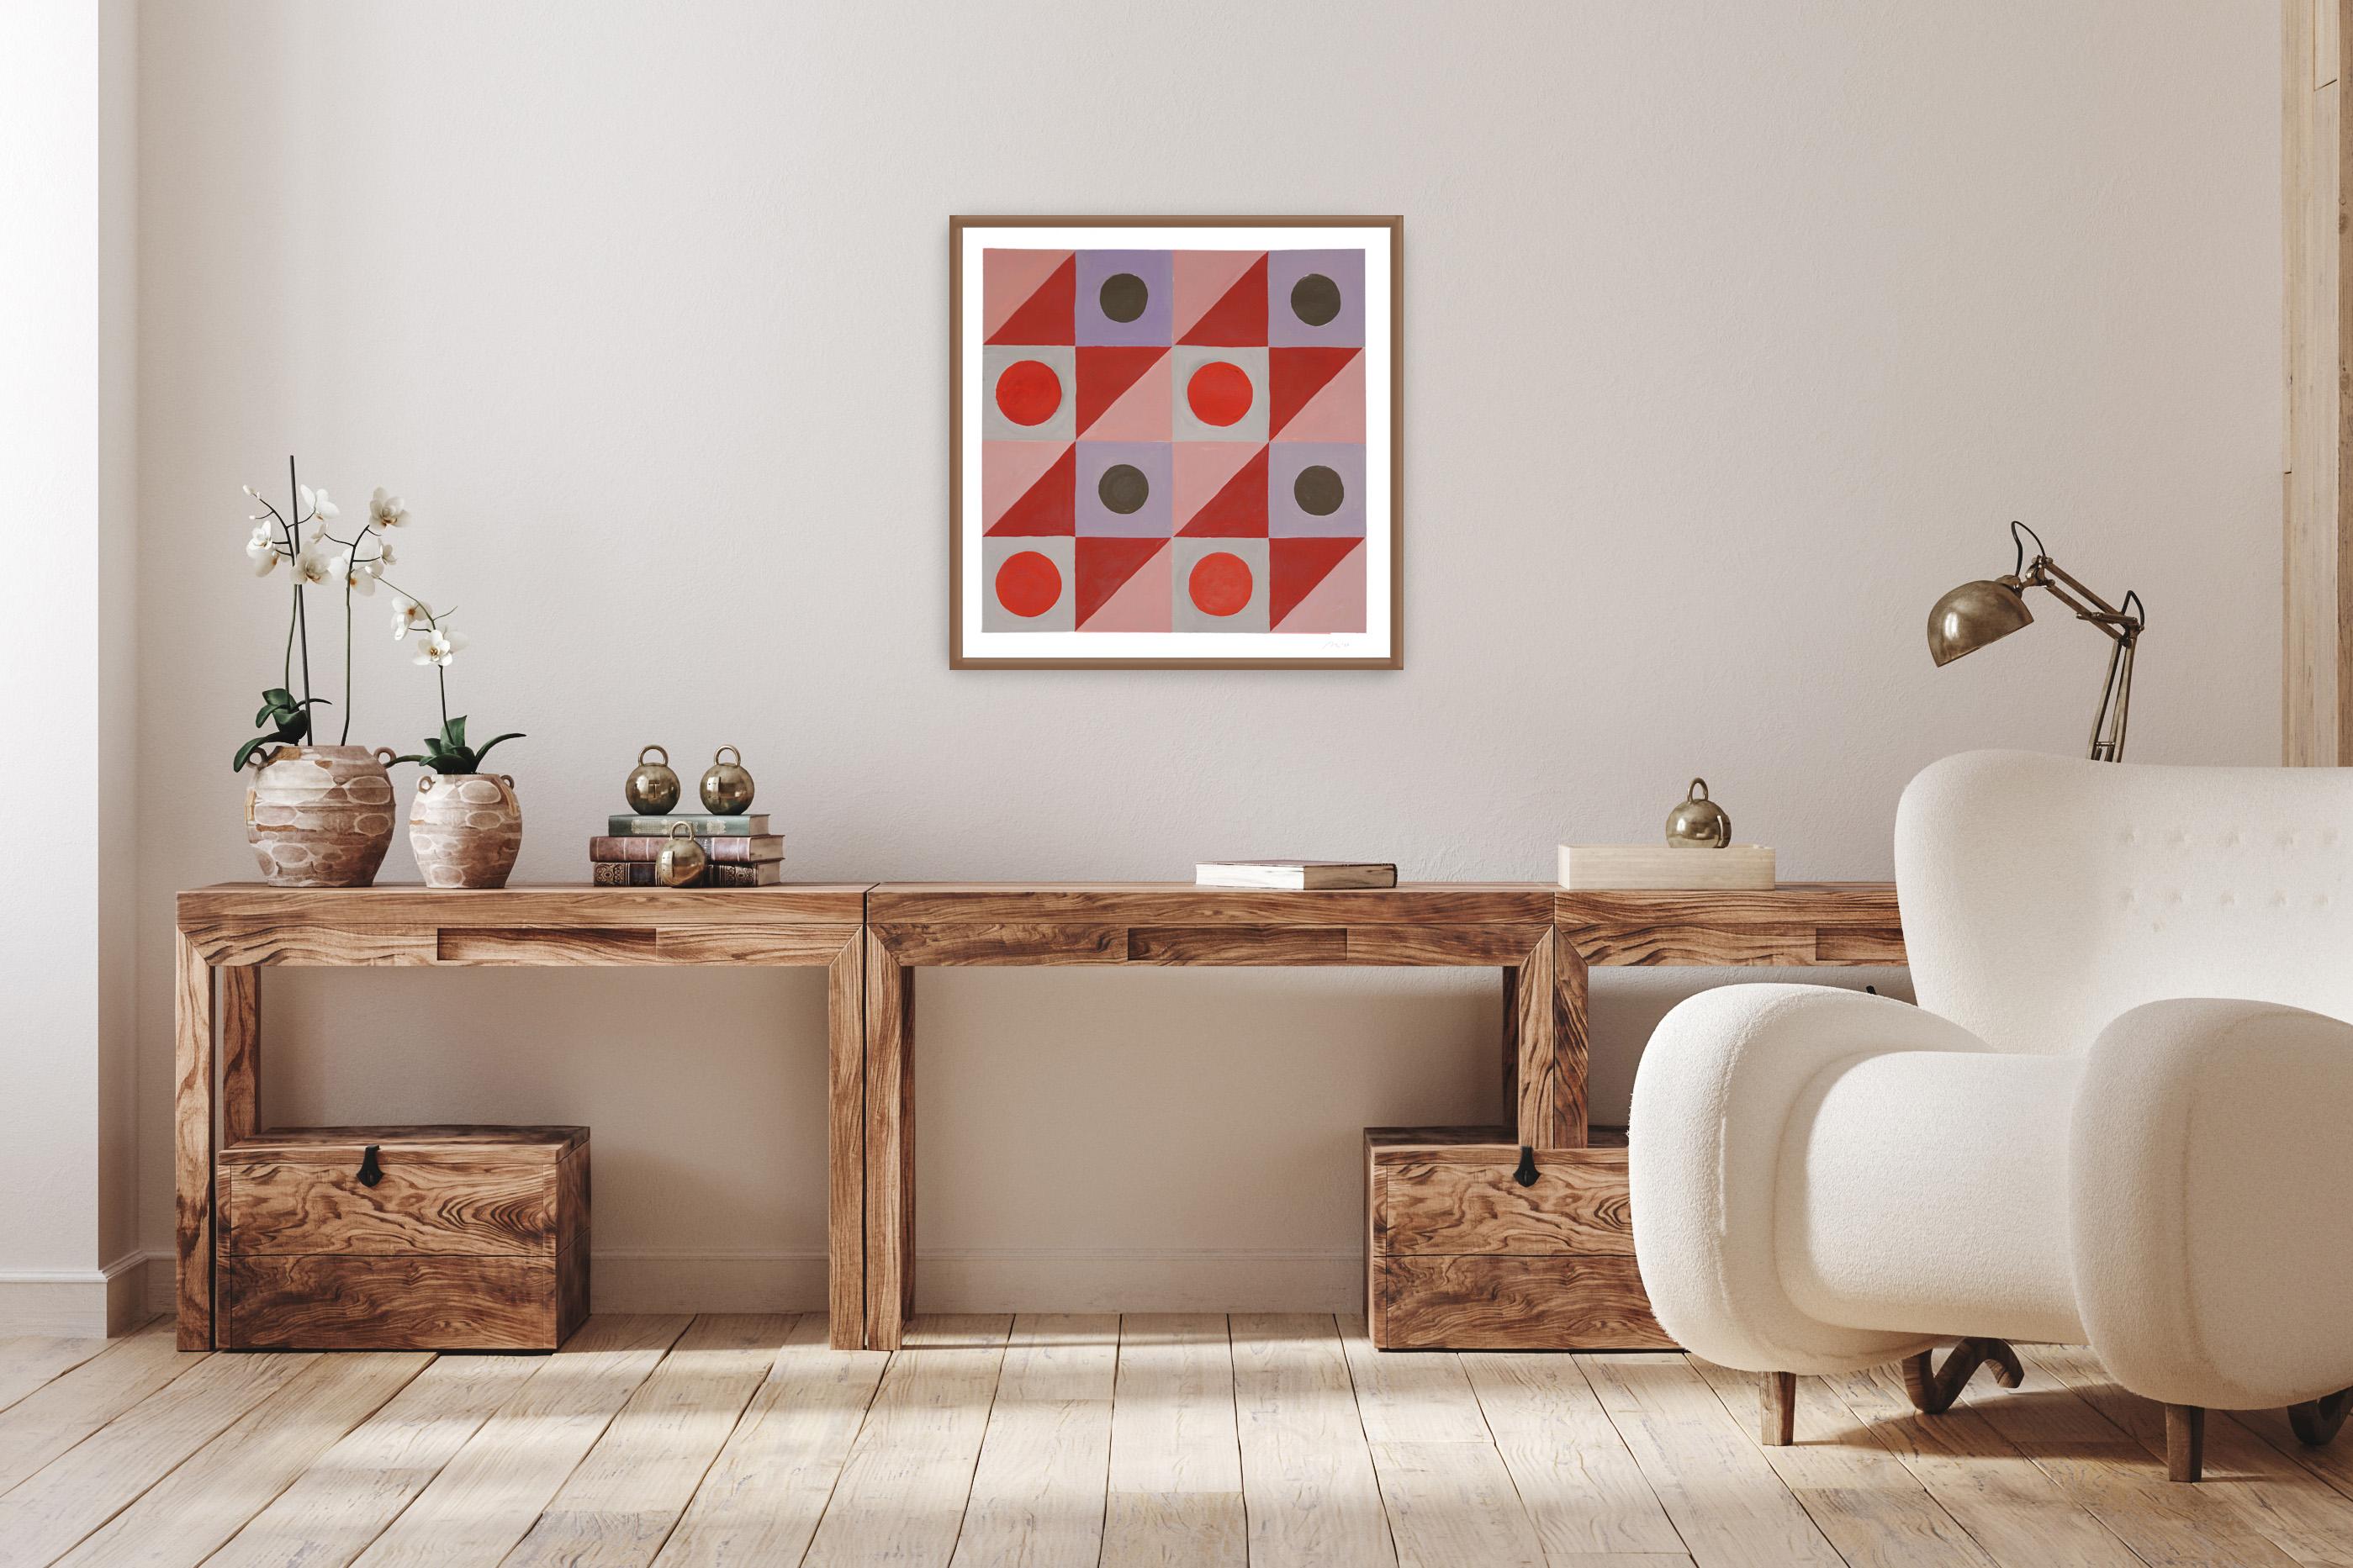 Late Spring Poppy Flower, Geometric Grid, Modernist Tiles, Red and Pink Circles - Painting by Natalia Roman